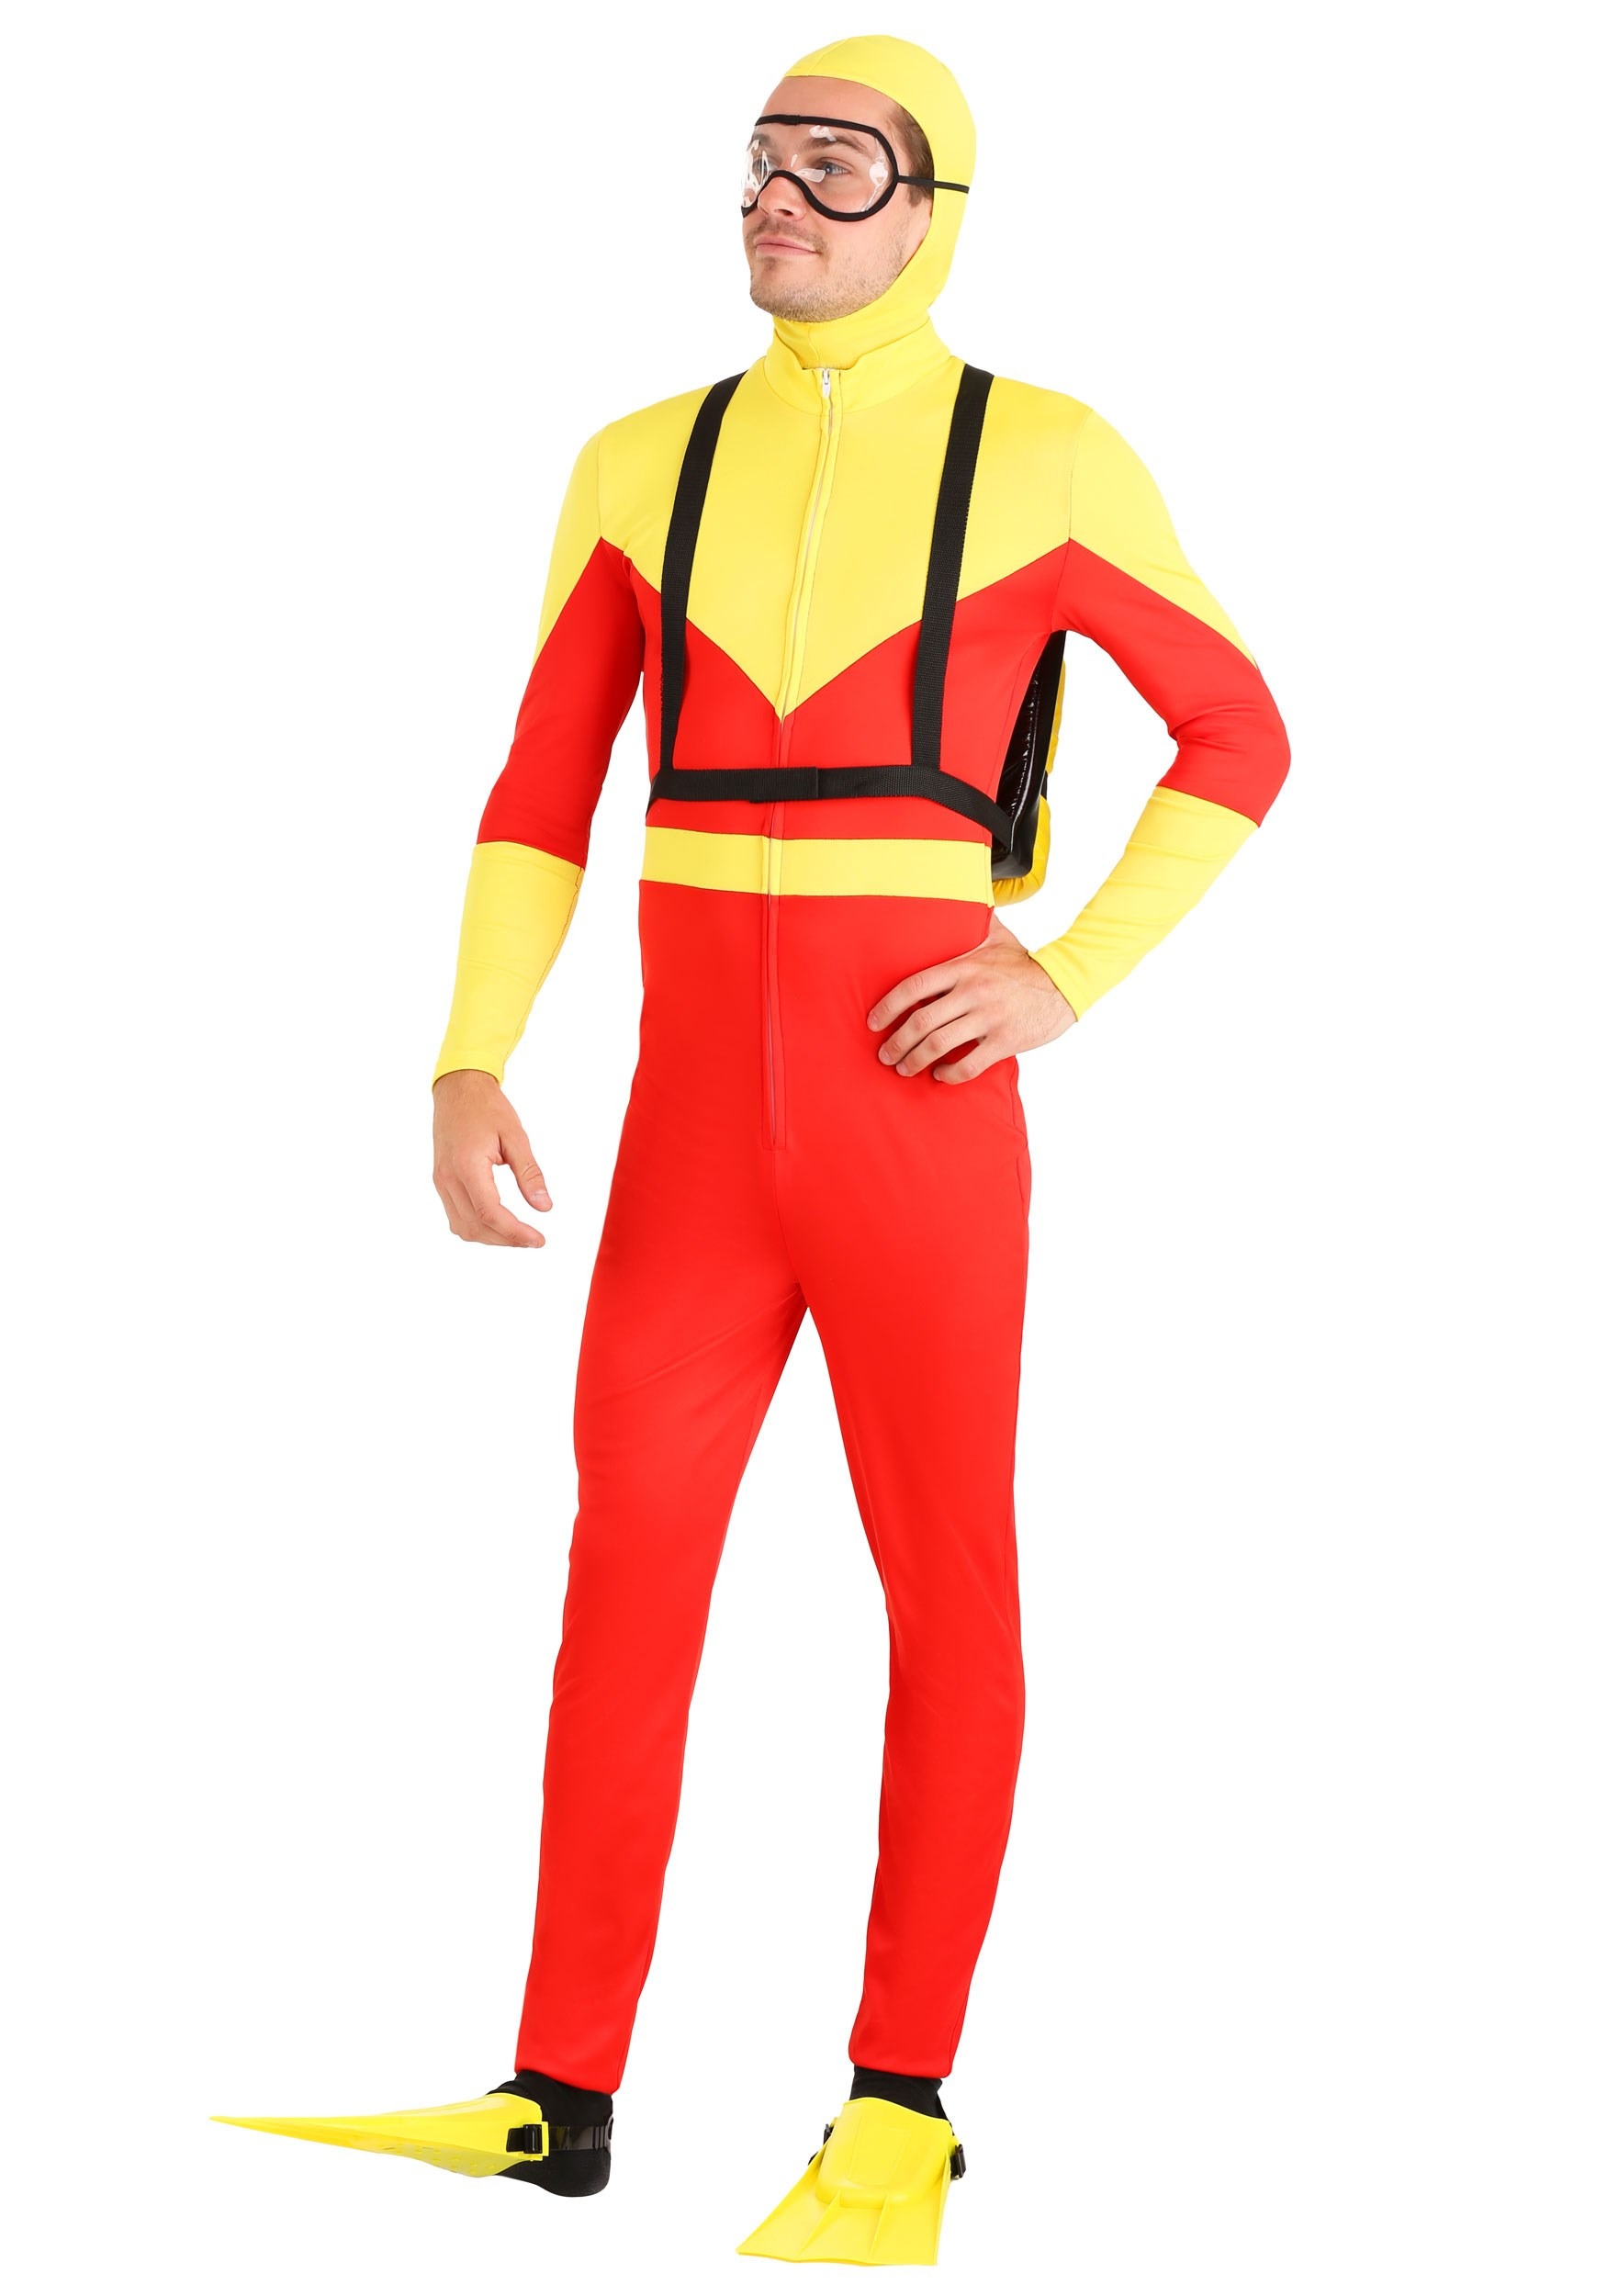 Photos - Fancy Dress FUN Costumes Sunny Scuba Diver Adult Costume Red/Yellow FUN1158AD